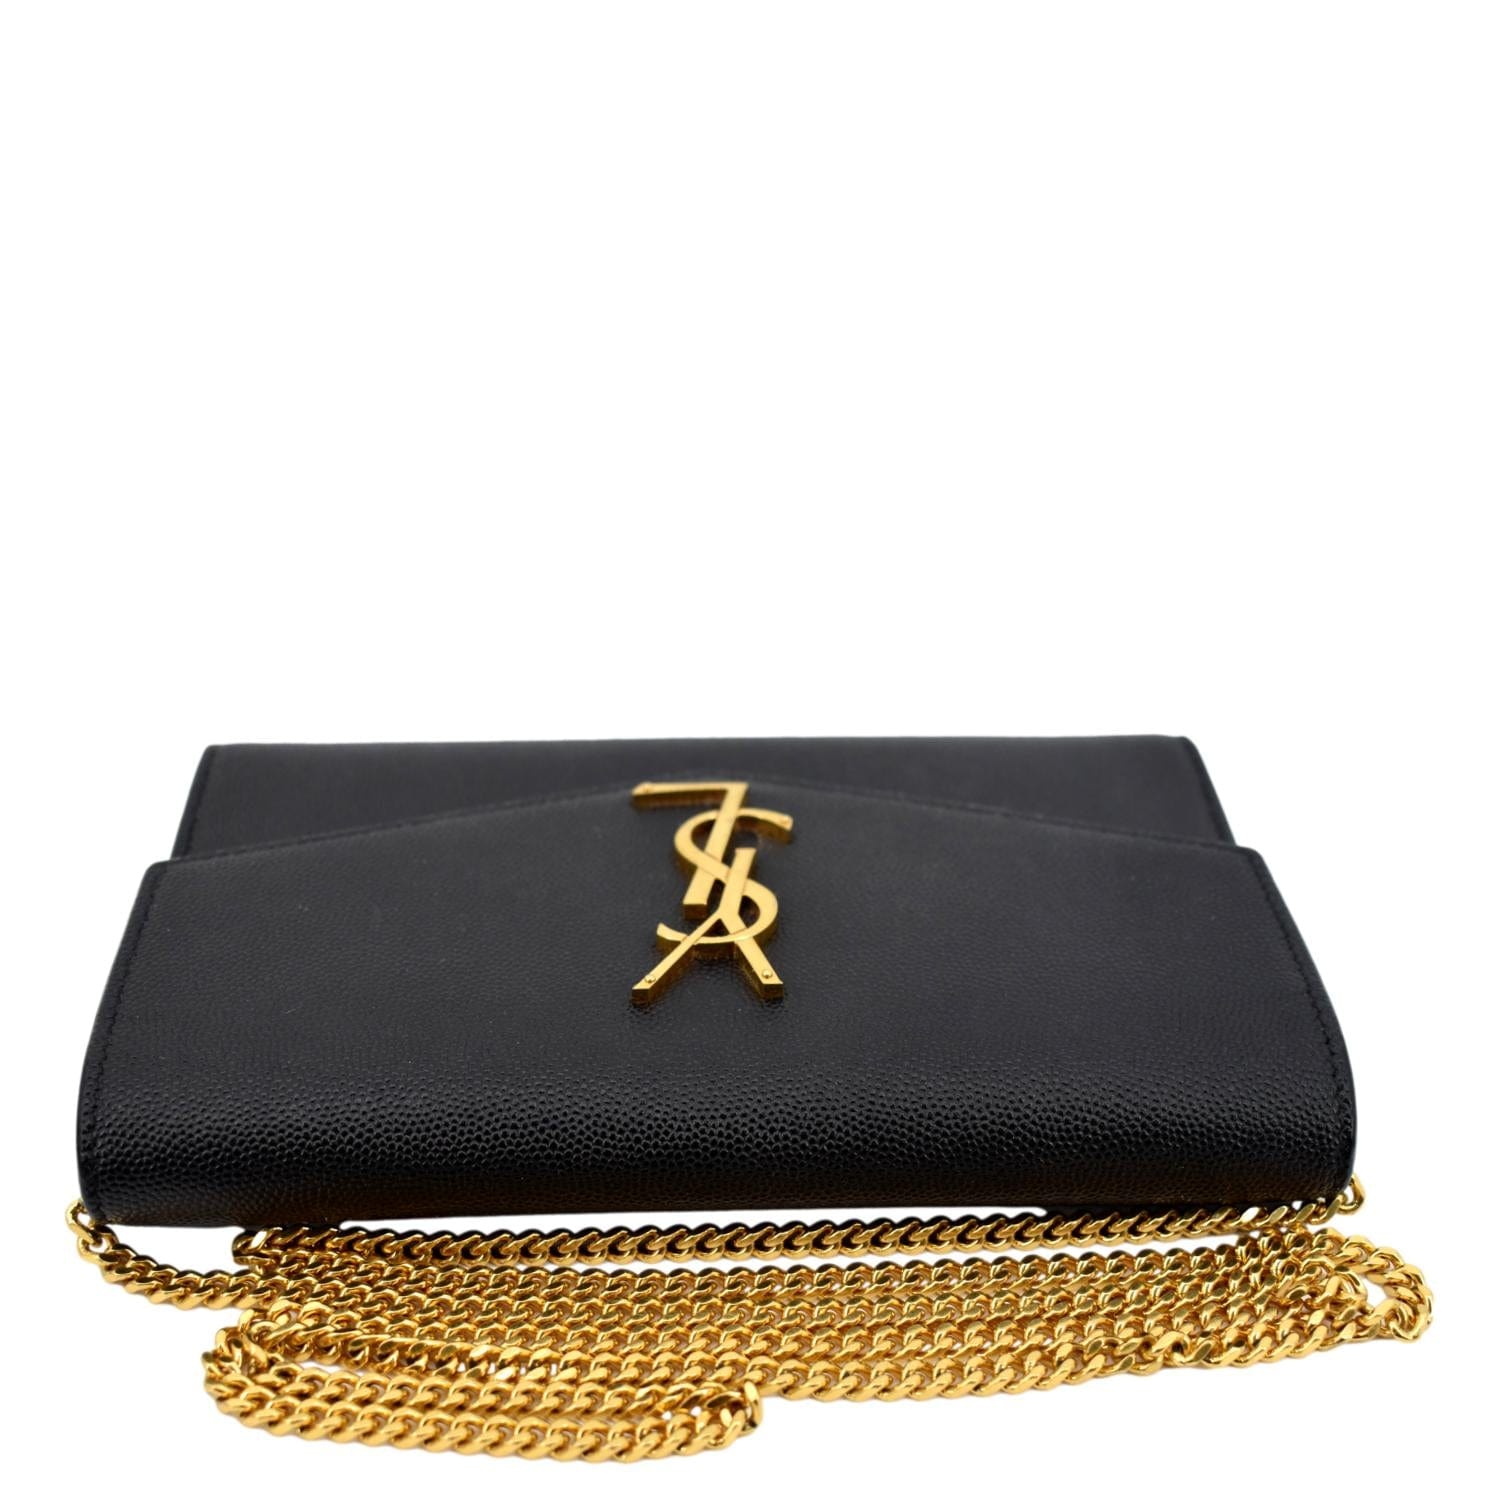 Uptown Leather Wallet On Chain in Black - Saint Laurent